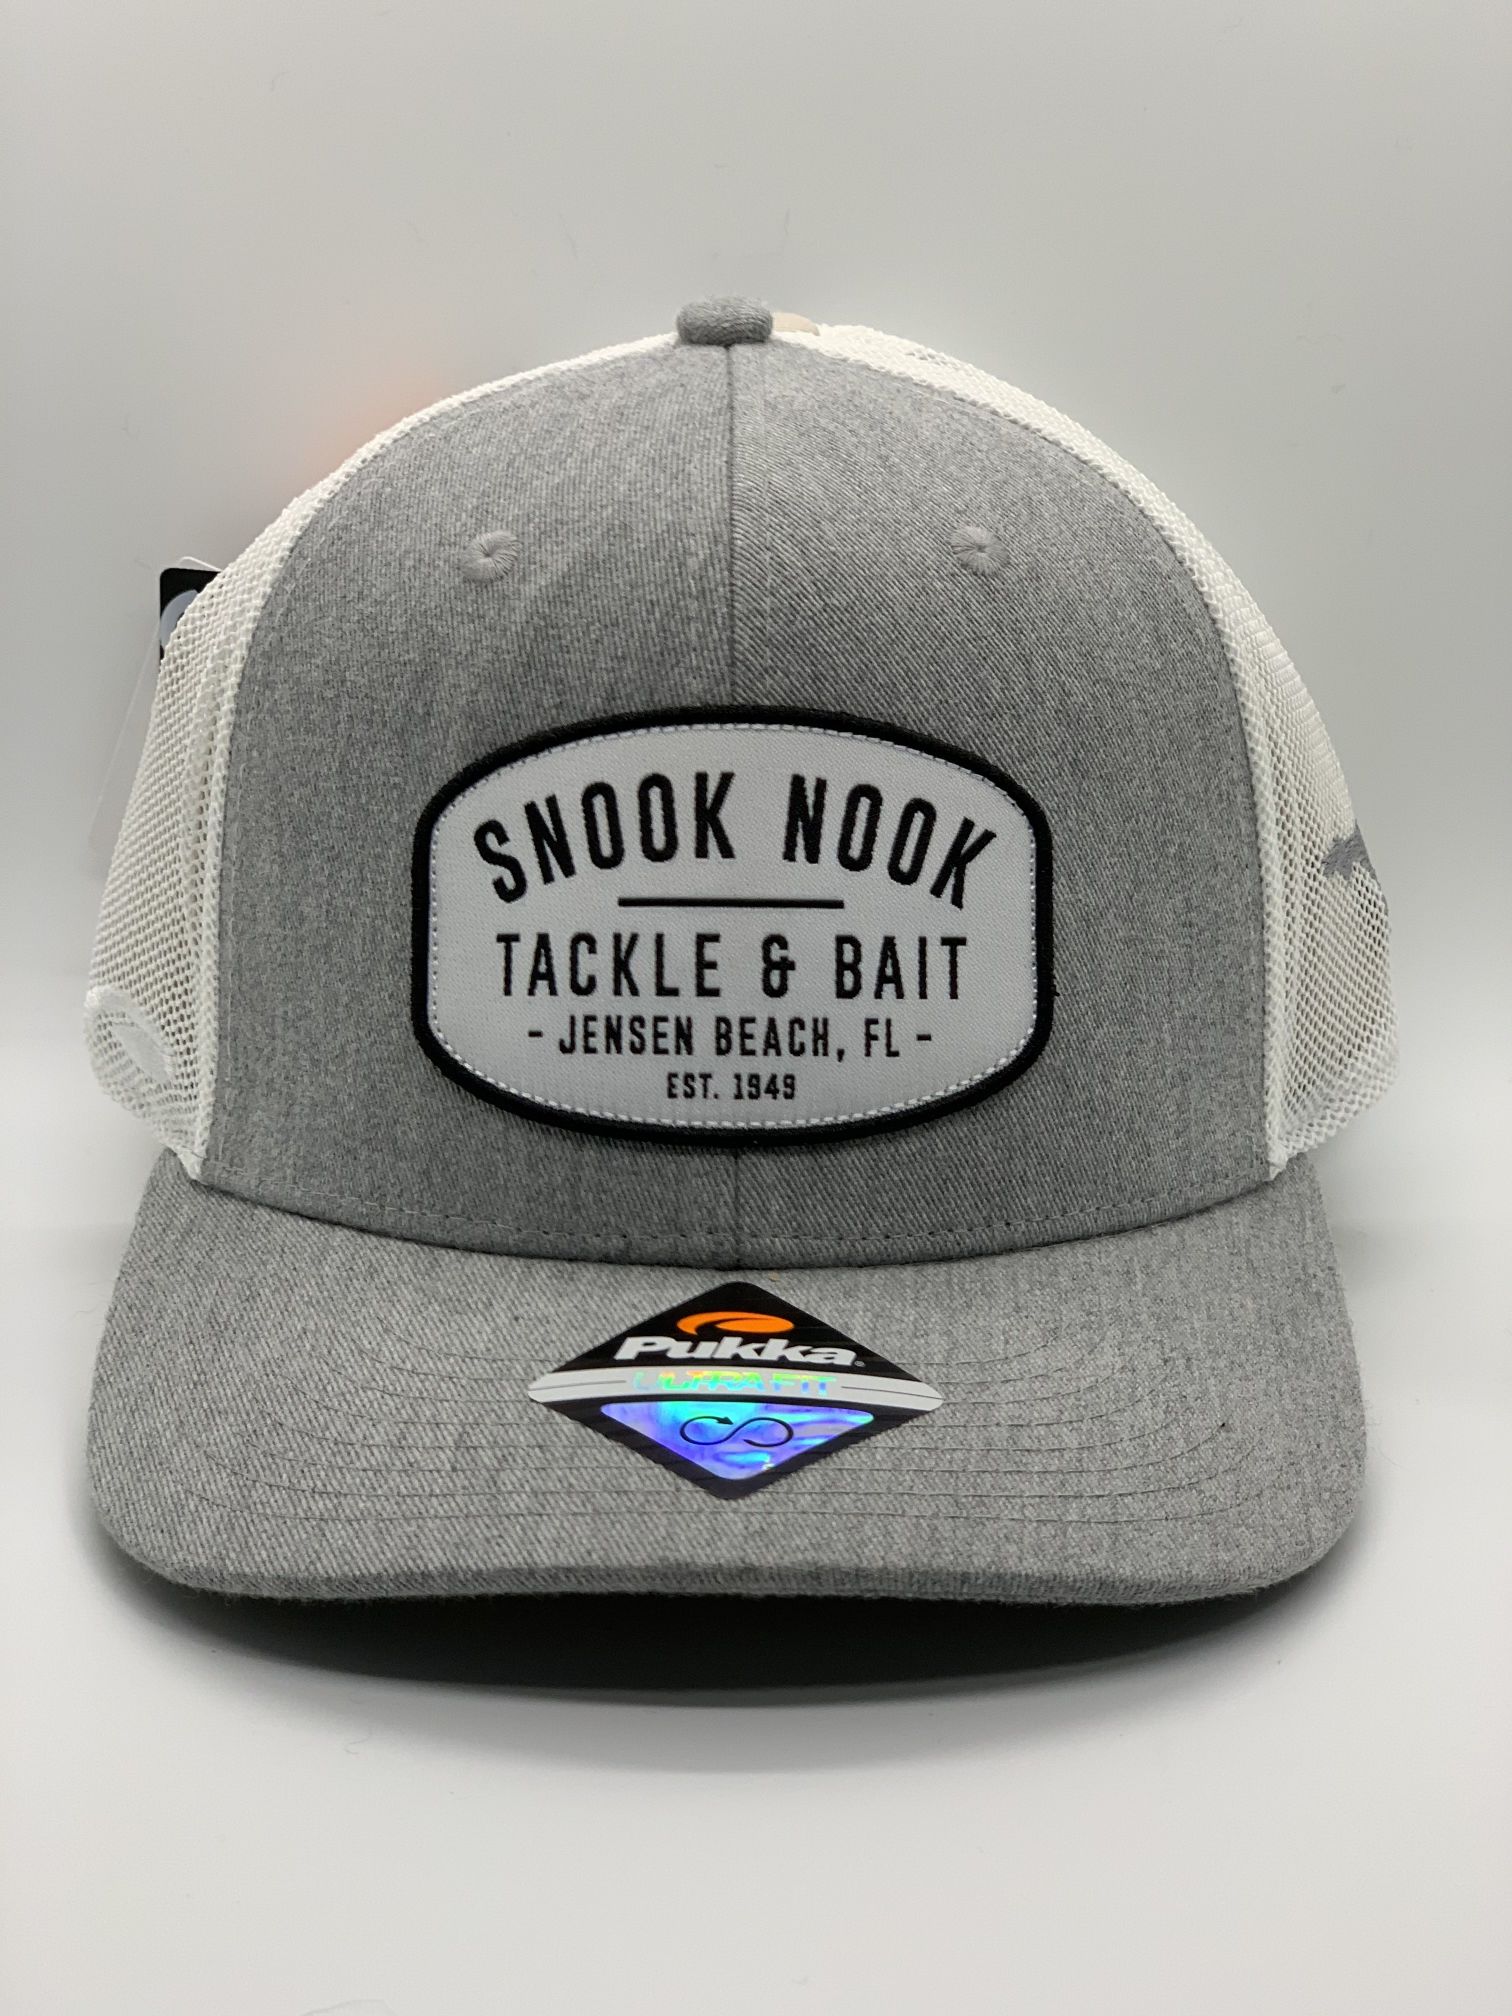 Some new Snook Nook hats just came in! Rumor has it you catch more